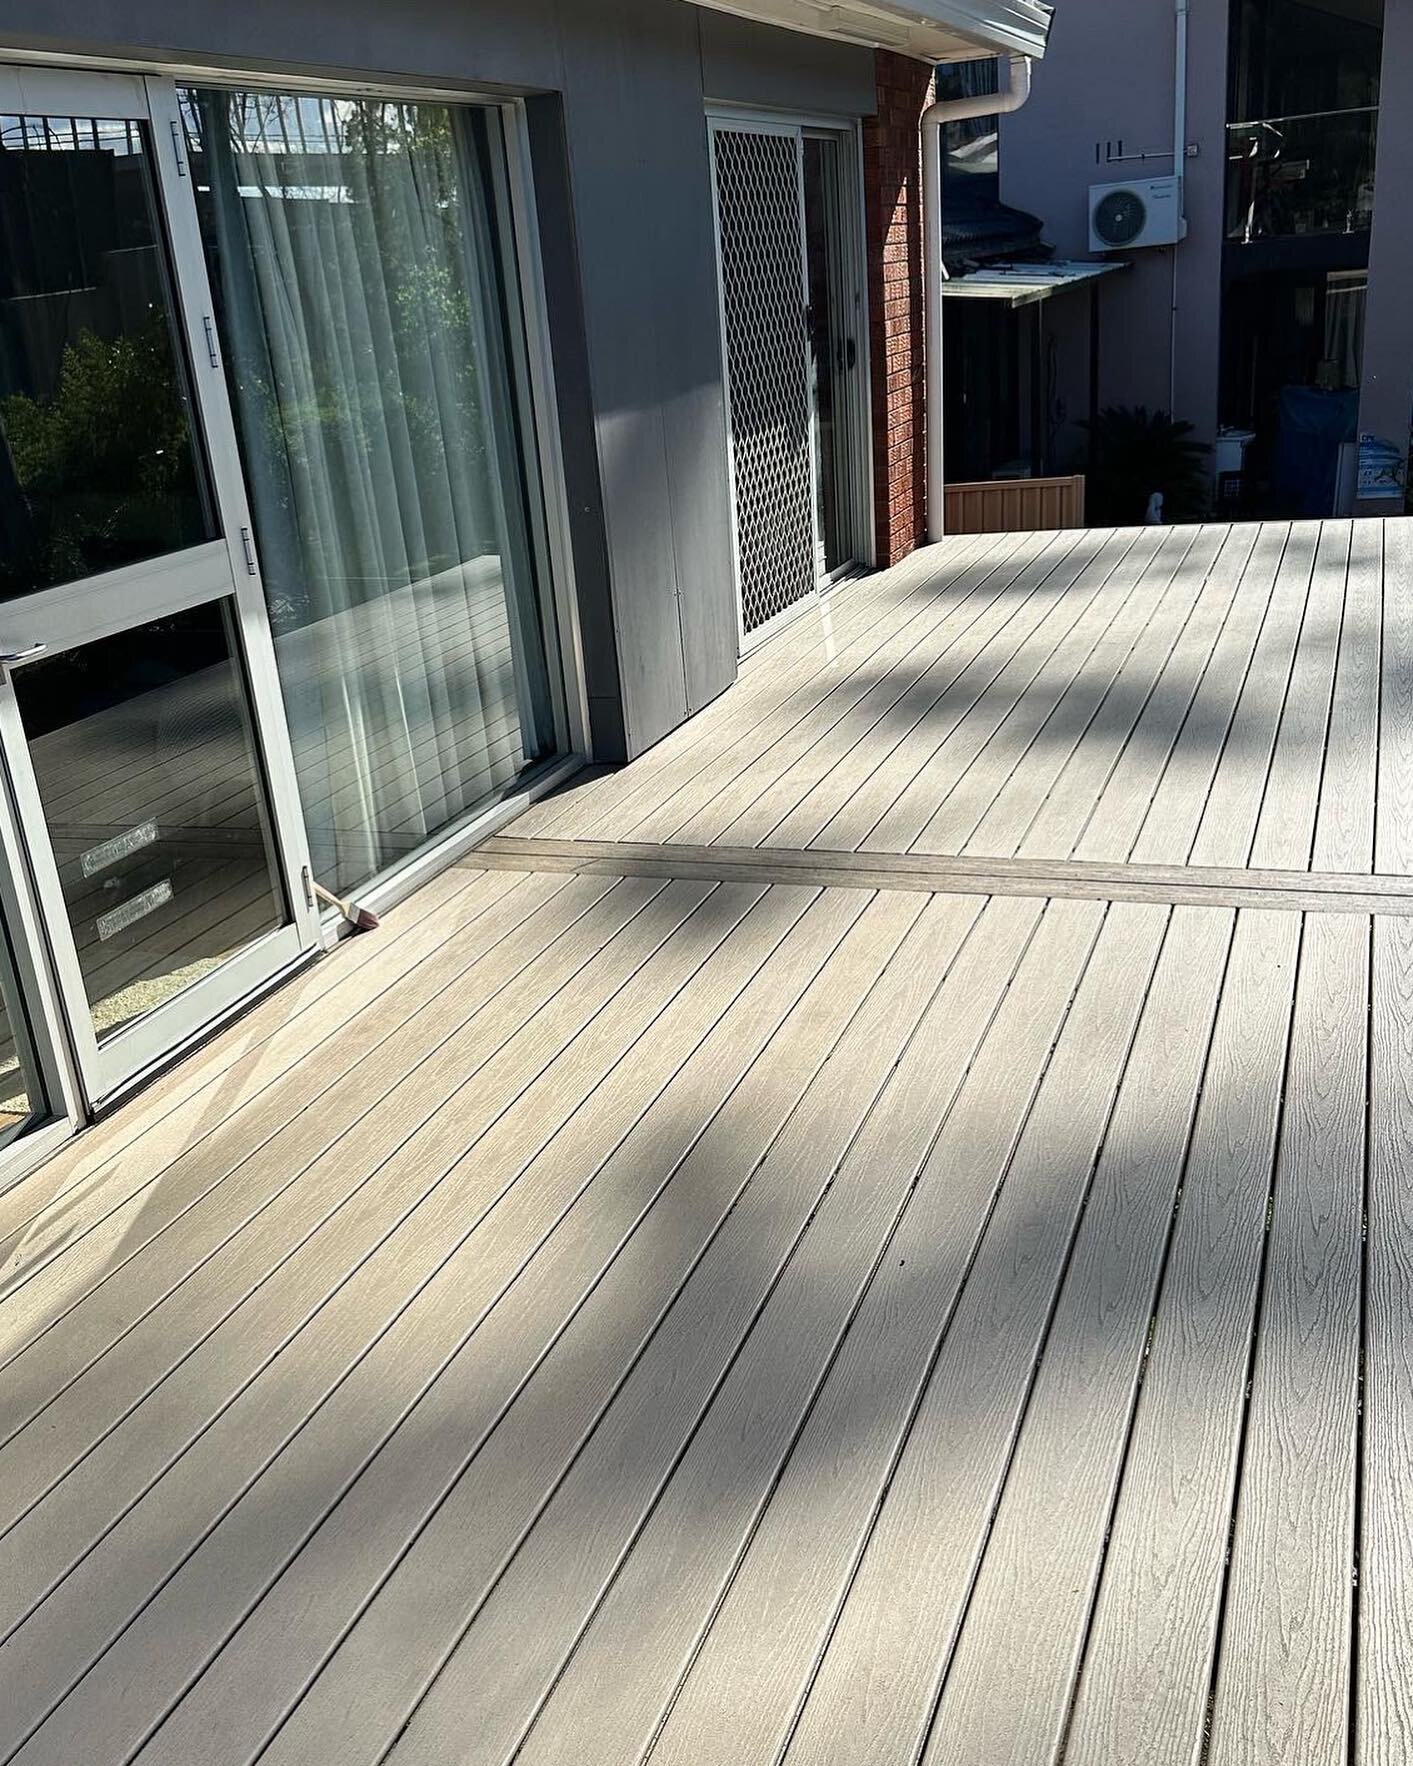 Trex Composite deck installed after the old treated pine was deemed unsafe. 

✅ Superior Durability&hellip; In order for a deck to be worth the cost, it needs to be durable. 

✅ Minimal Maintenance, because composite decking won't break down and rot 